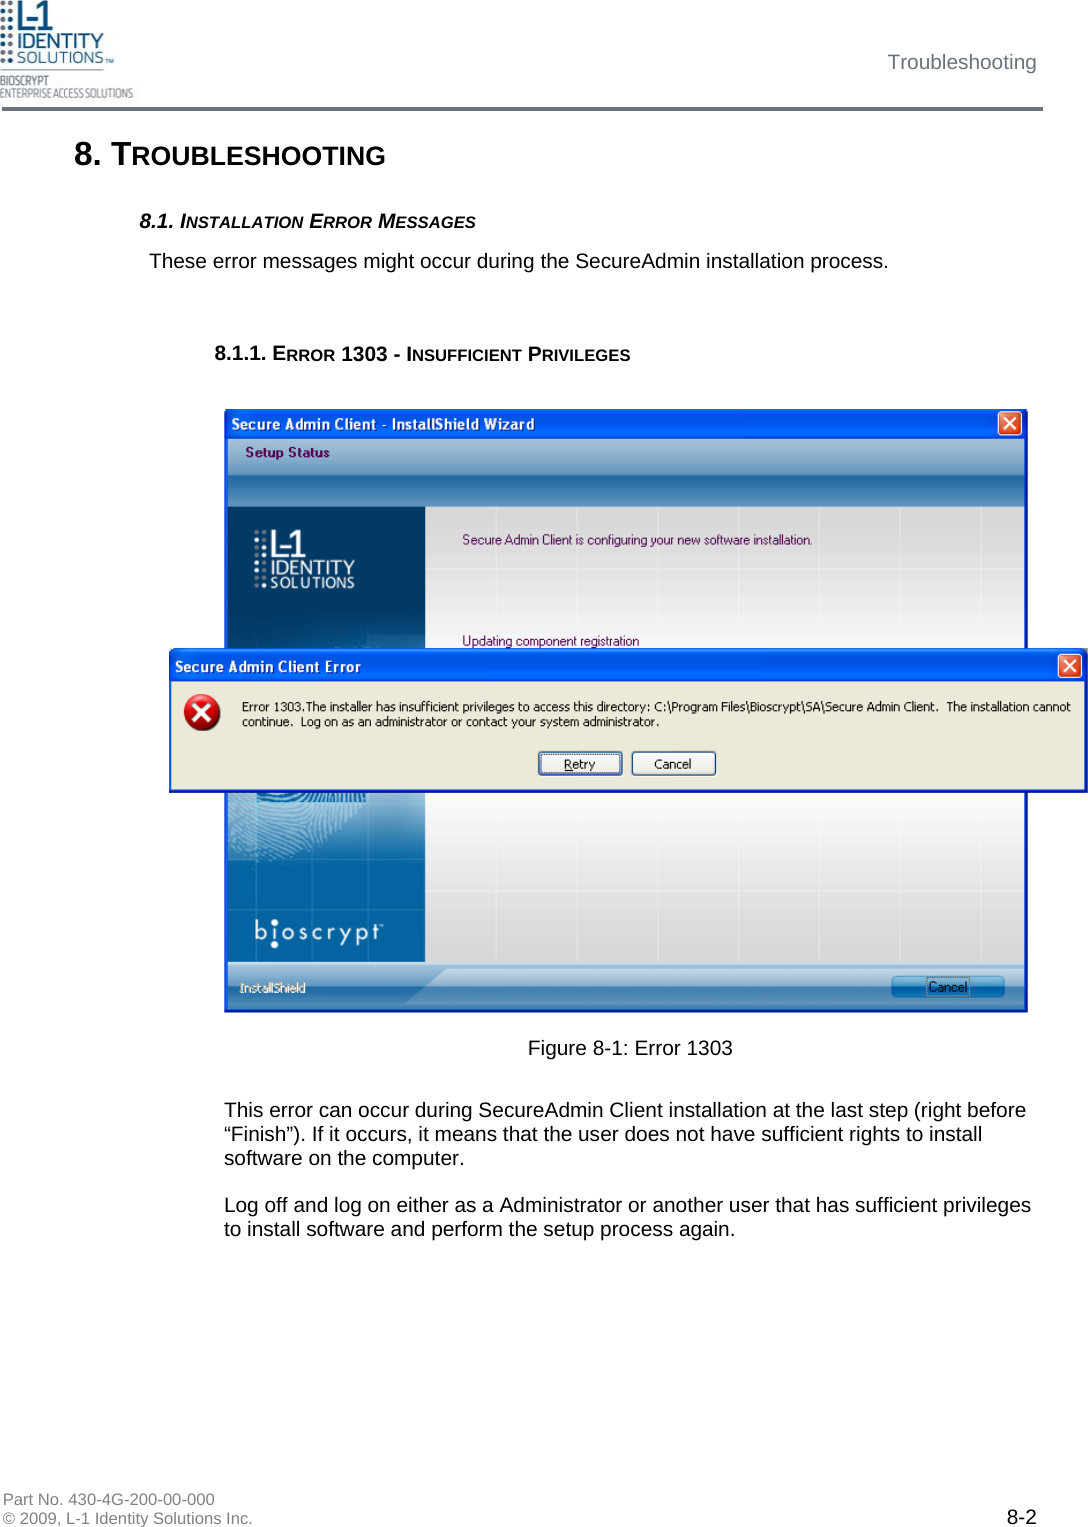 Troubleshooting Part No. 430-4G-200-00-000 © 2009, L-1 Identity Solutions Inc.  8-2 8. TROUBLESHOOTING These error messages might occur during the SecureAdmin installation process. 8.1. INSTALLATION ERROR MESSAGES 8.1.1. ERROR 1303 - INSUFFICIENT PRIVILEGES This error can occur during SecureAdmin Client installation at the last step (right before “Finish”). If it occurs, it means that the user does not have sufficient rights to install software on the computer.  Log off and log on either as a Administrator or another user that has sufficient privileges to install software and perform the setup process again. Figure 8-1: Error 1303 